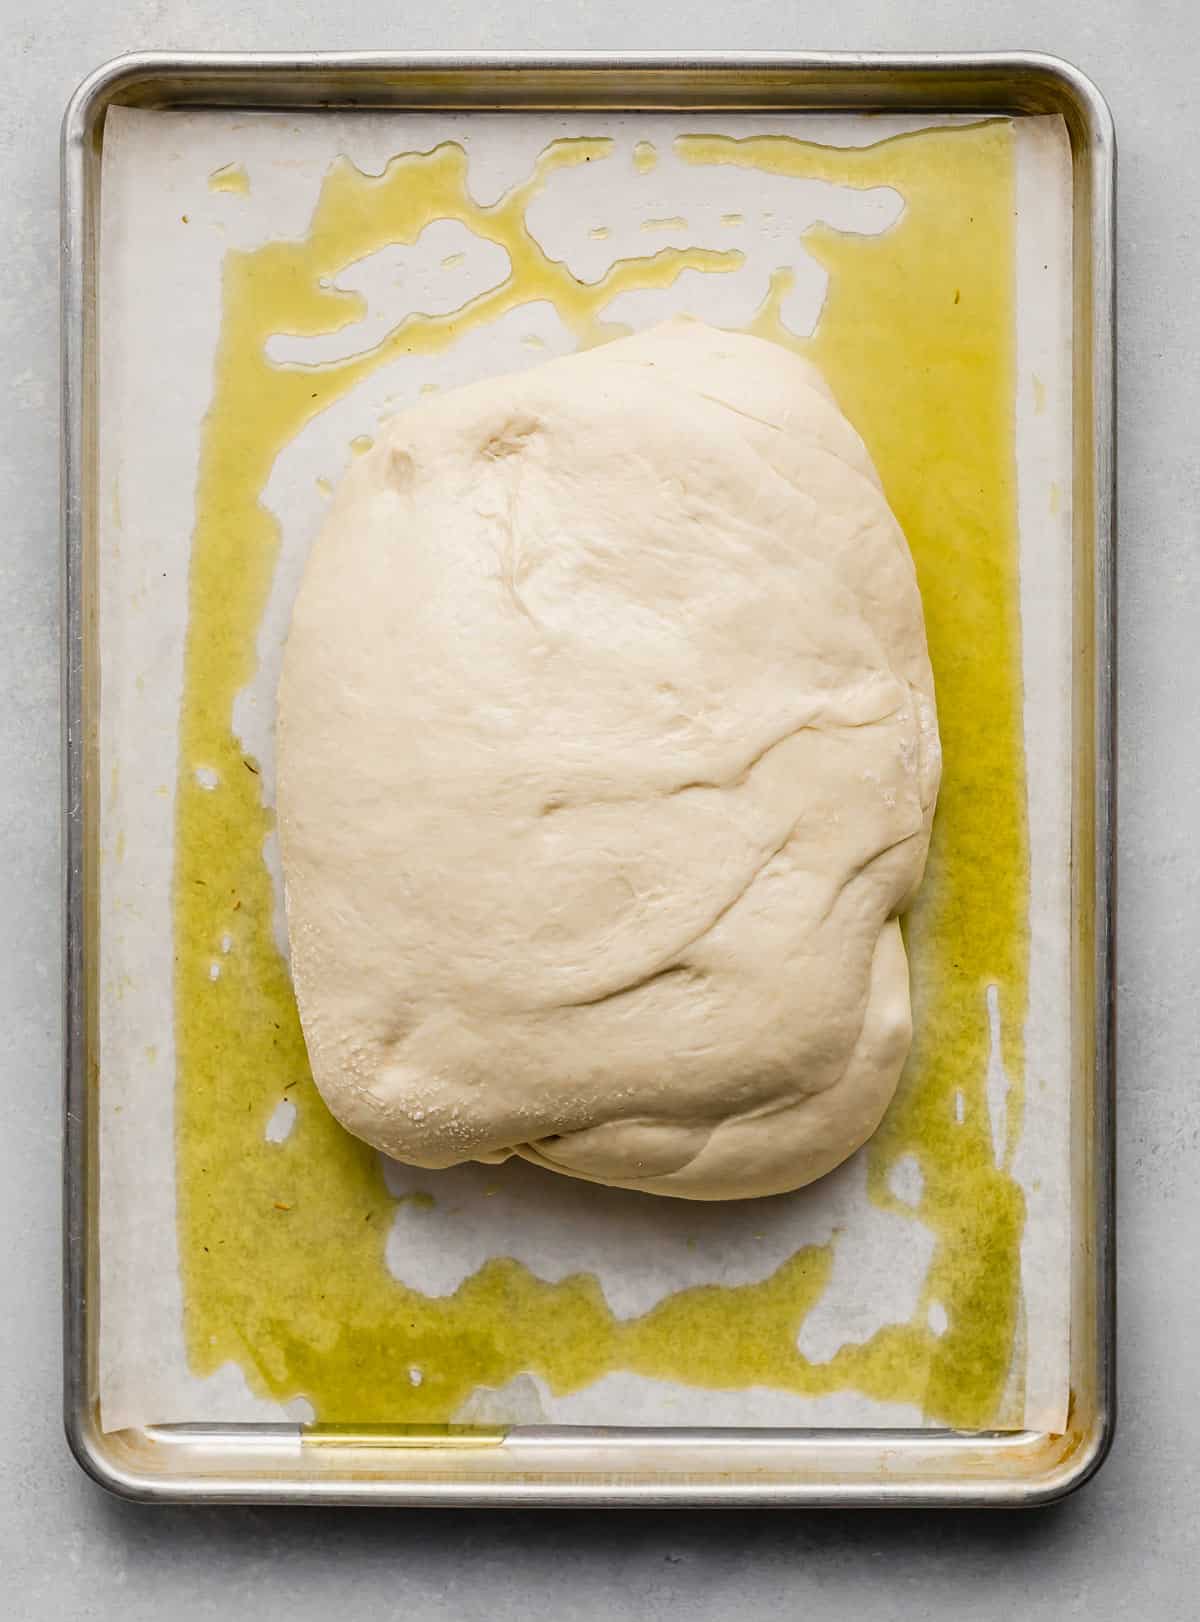 Focaccia Bread dough shaped in a rectangle on an oil covered baking sheet.